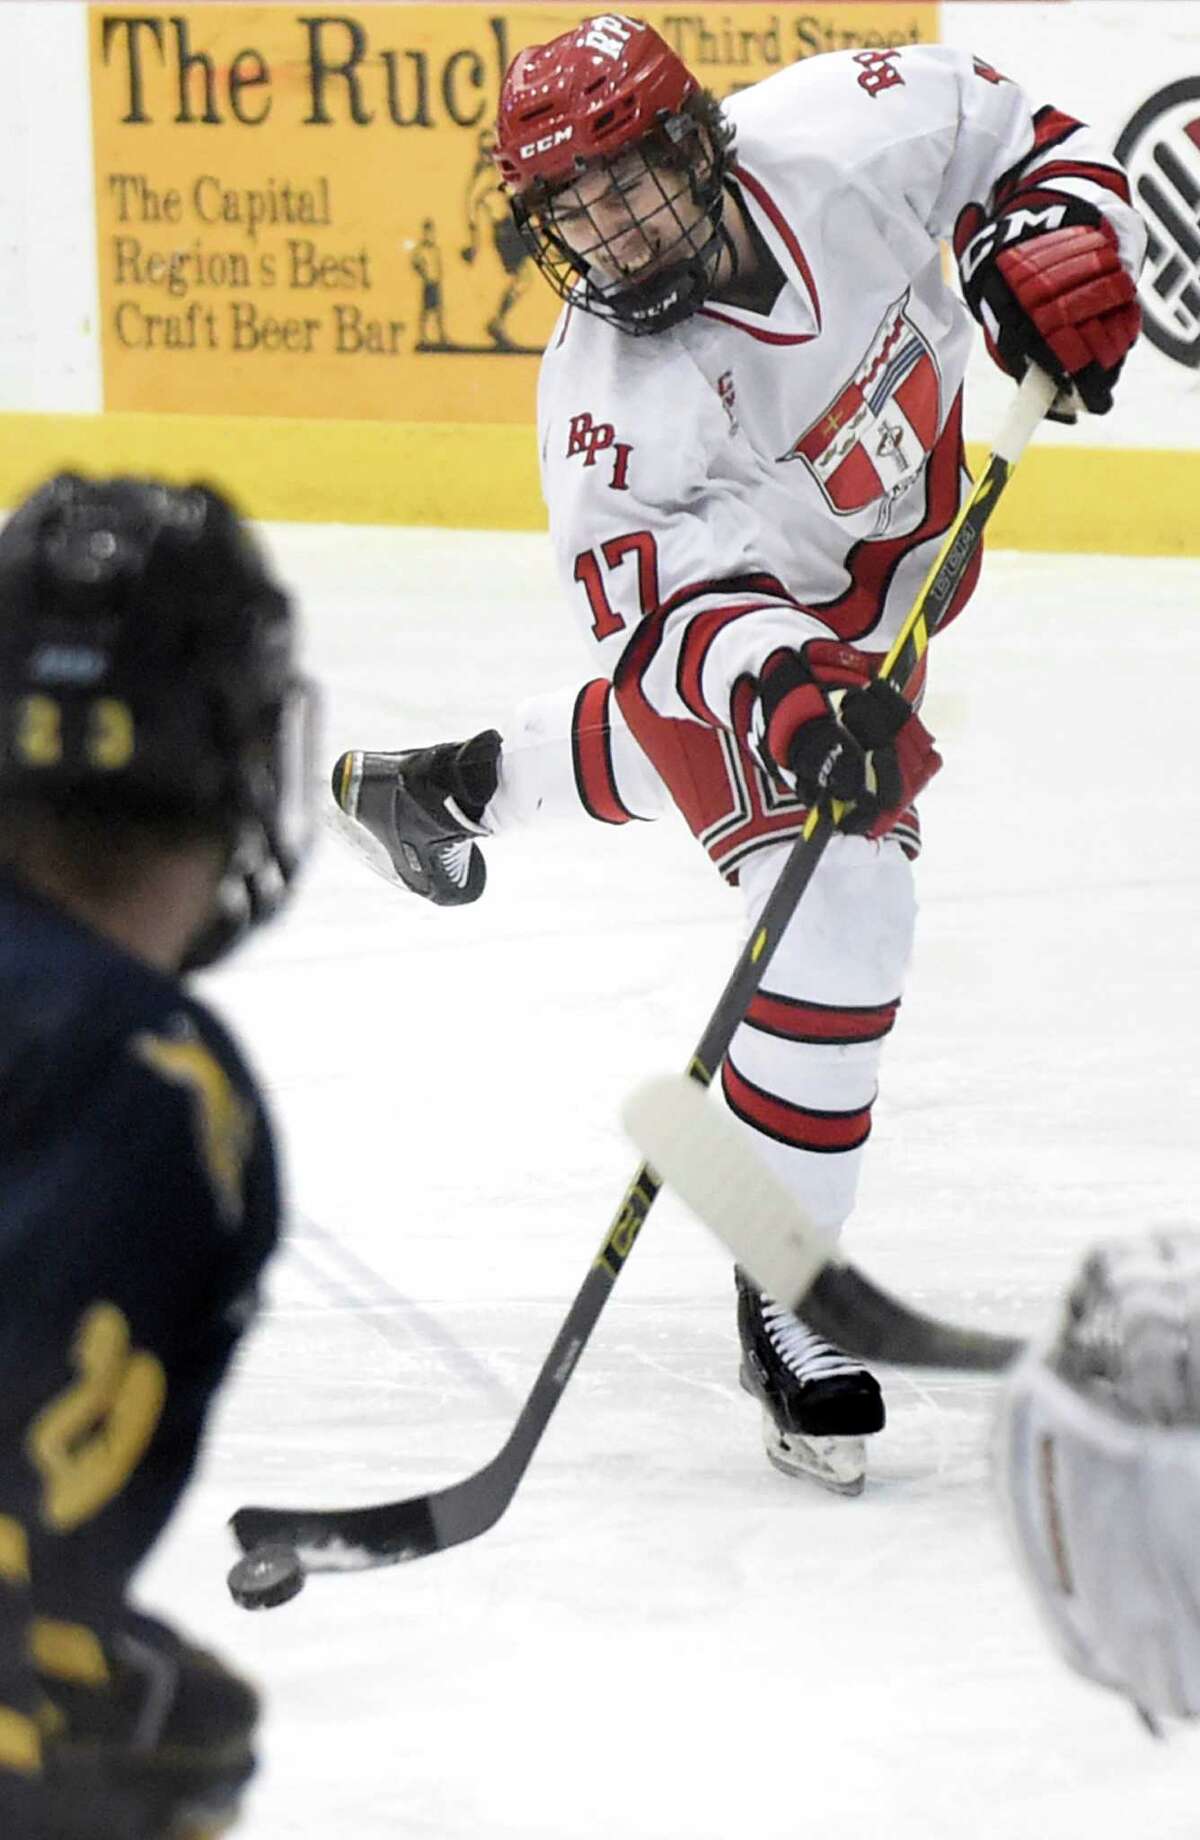 Milos Bubela, a 2016 graduate of Rensselaer Polytechnic Institute and former Engineers hockey player, will compete with the Slovakian national team at the 2018 Winter Olympics. Keep clicking through the slideshow to see the Team USA athletes headed to Pyeongchang, South Korea, who also have connections to New York.